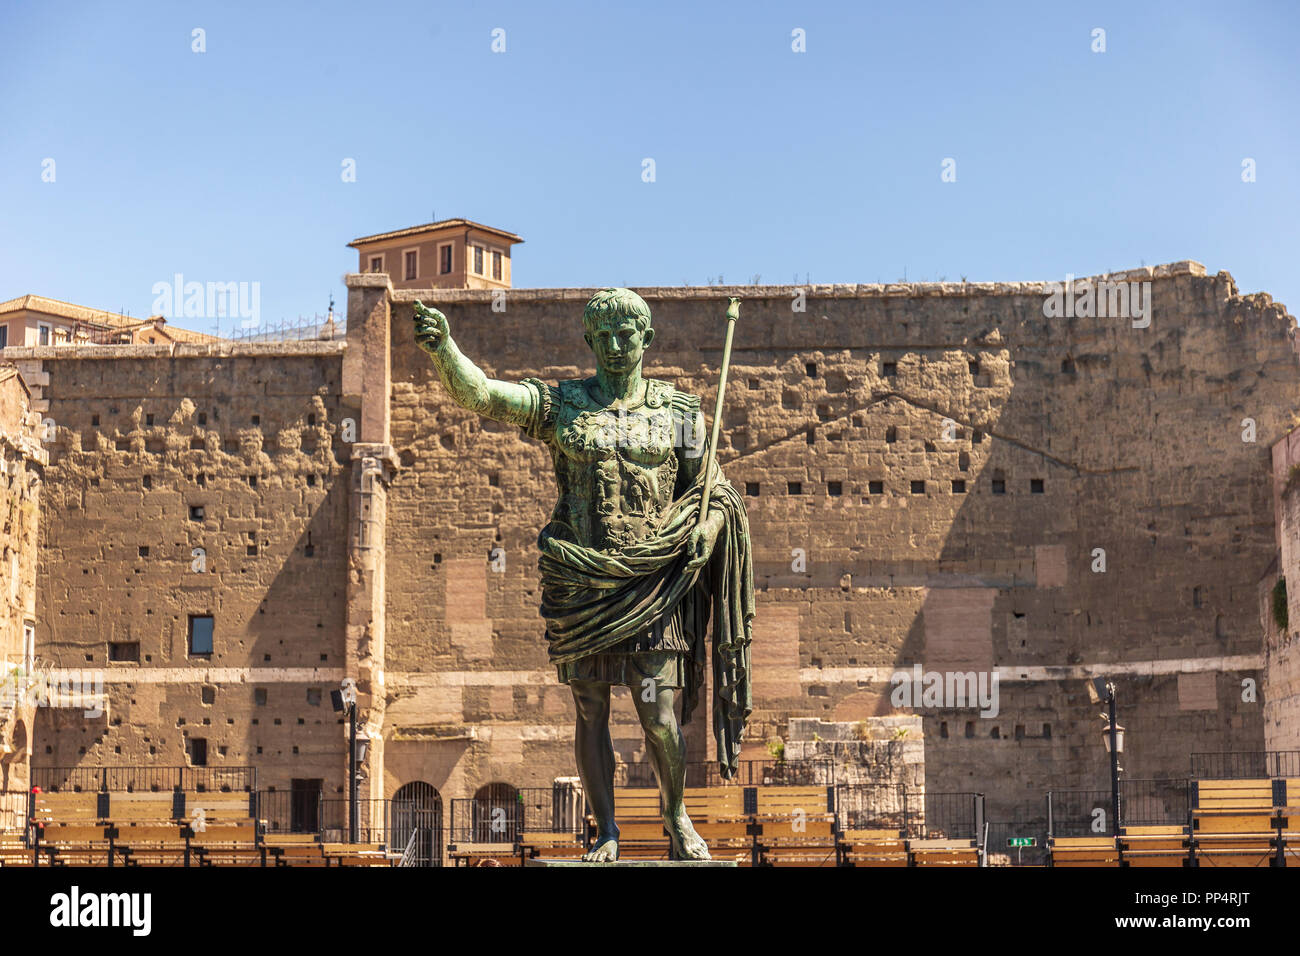 The statue of Emperor Augustus in Rome, Italy Stock Photo